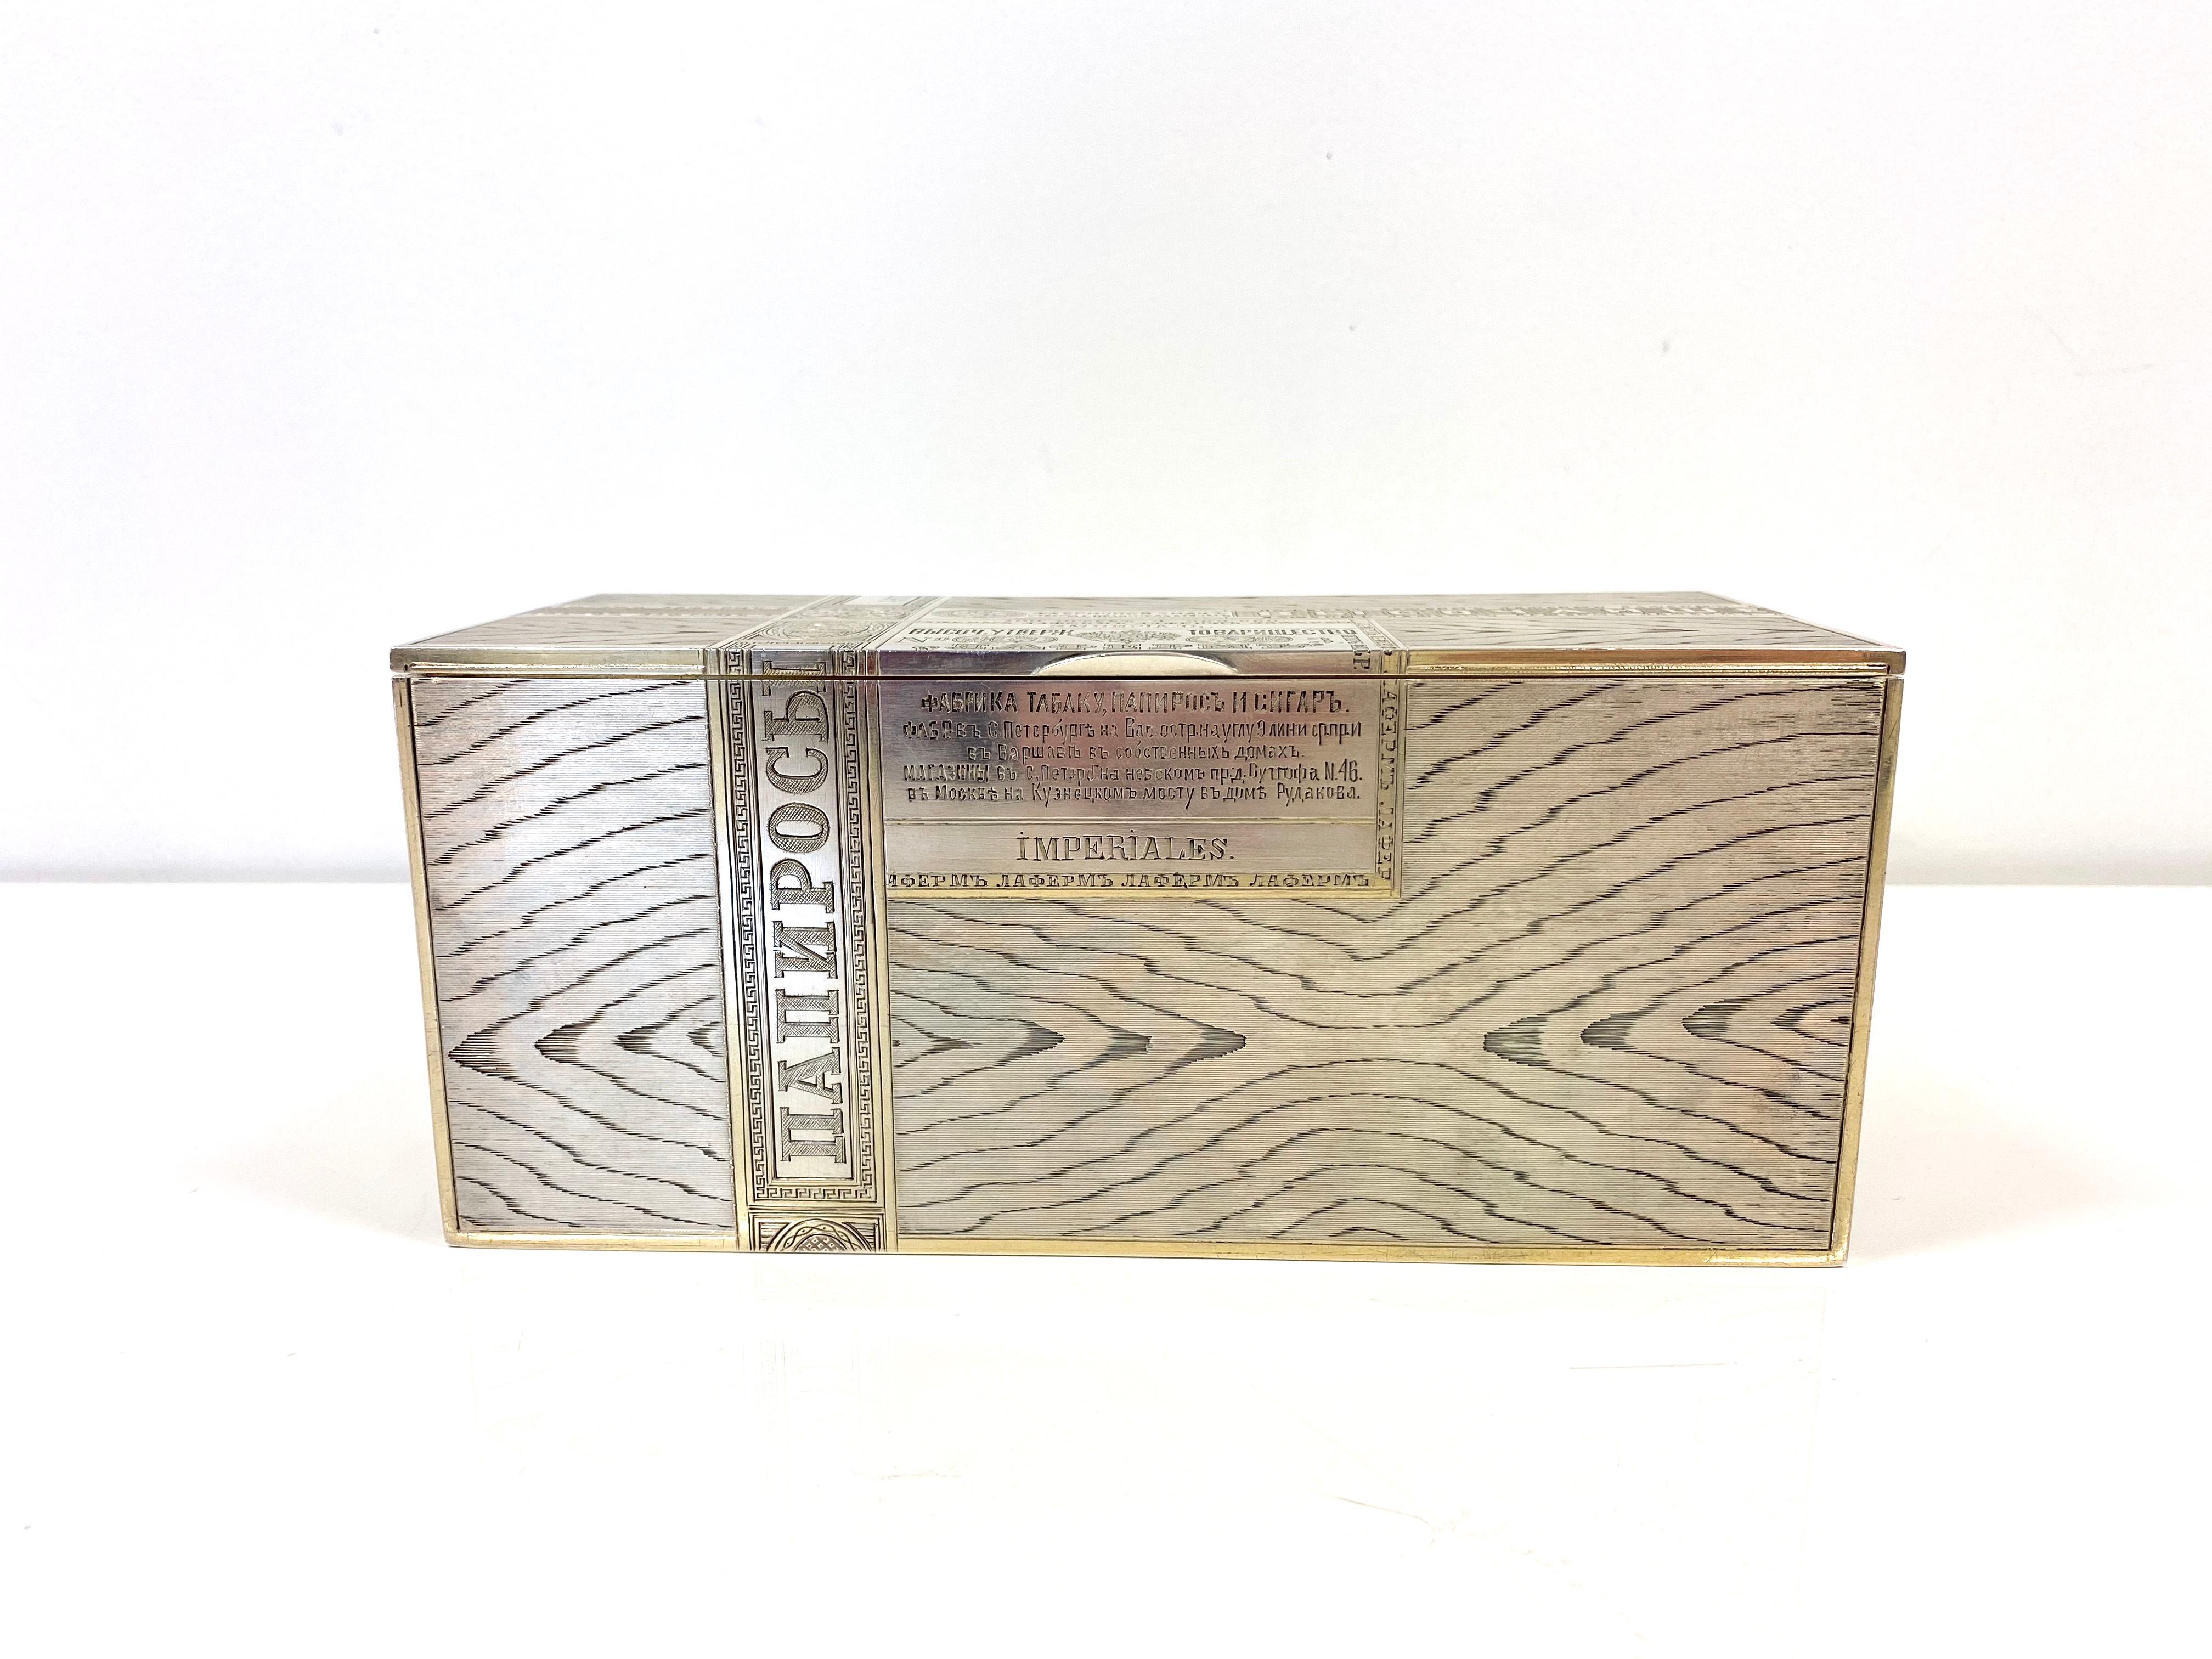 84 Silver Russia 1880 Antique trompe-l’oeil Cigarette Box
Made in Russia in 1880, the lid and sides superbly engraved to imitate woodgrain and tobacco paper tax bands.
Cigar boxes this size are rare.
Marked with 84 zolotniks Imperial Russian silver